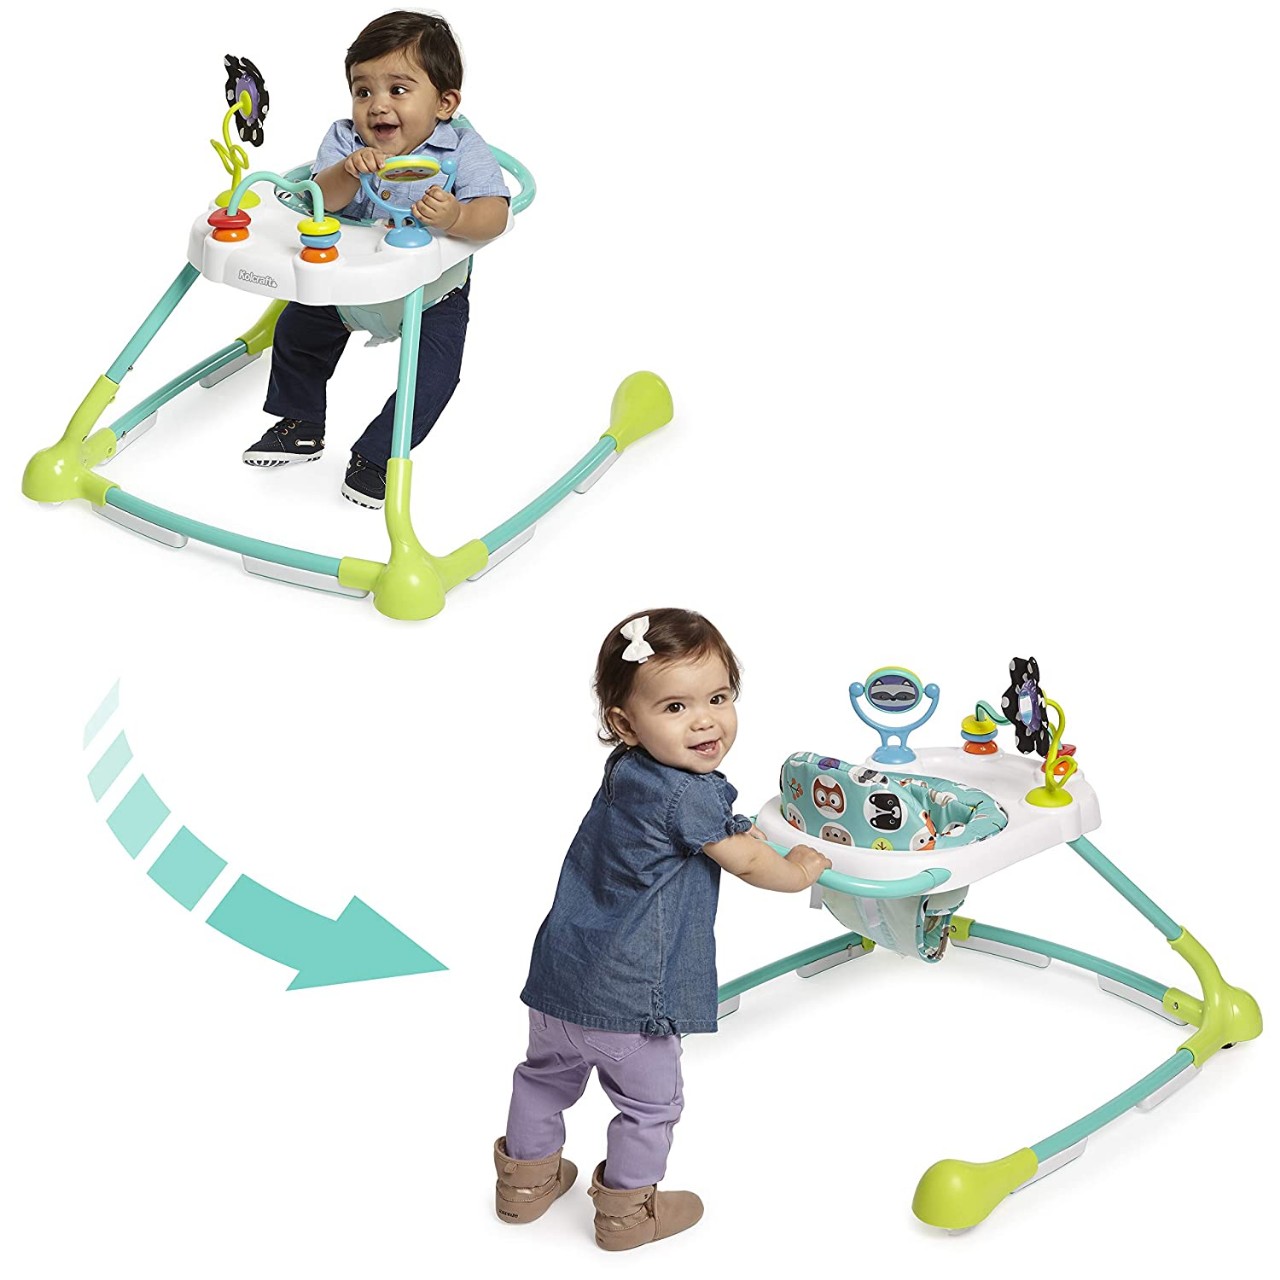 Kolcraft Tiny Steps Too 2-in-1 Infant & Baby Activity Walker - Seated or Walk-Behind, Forest Friends